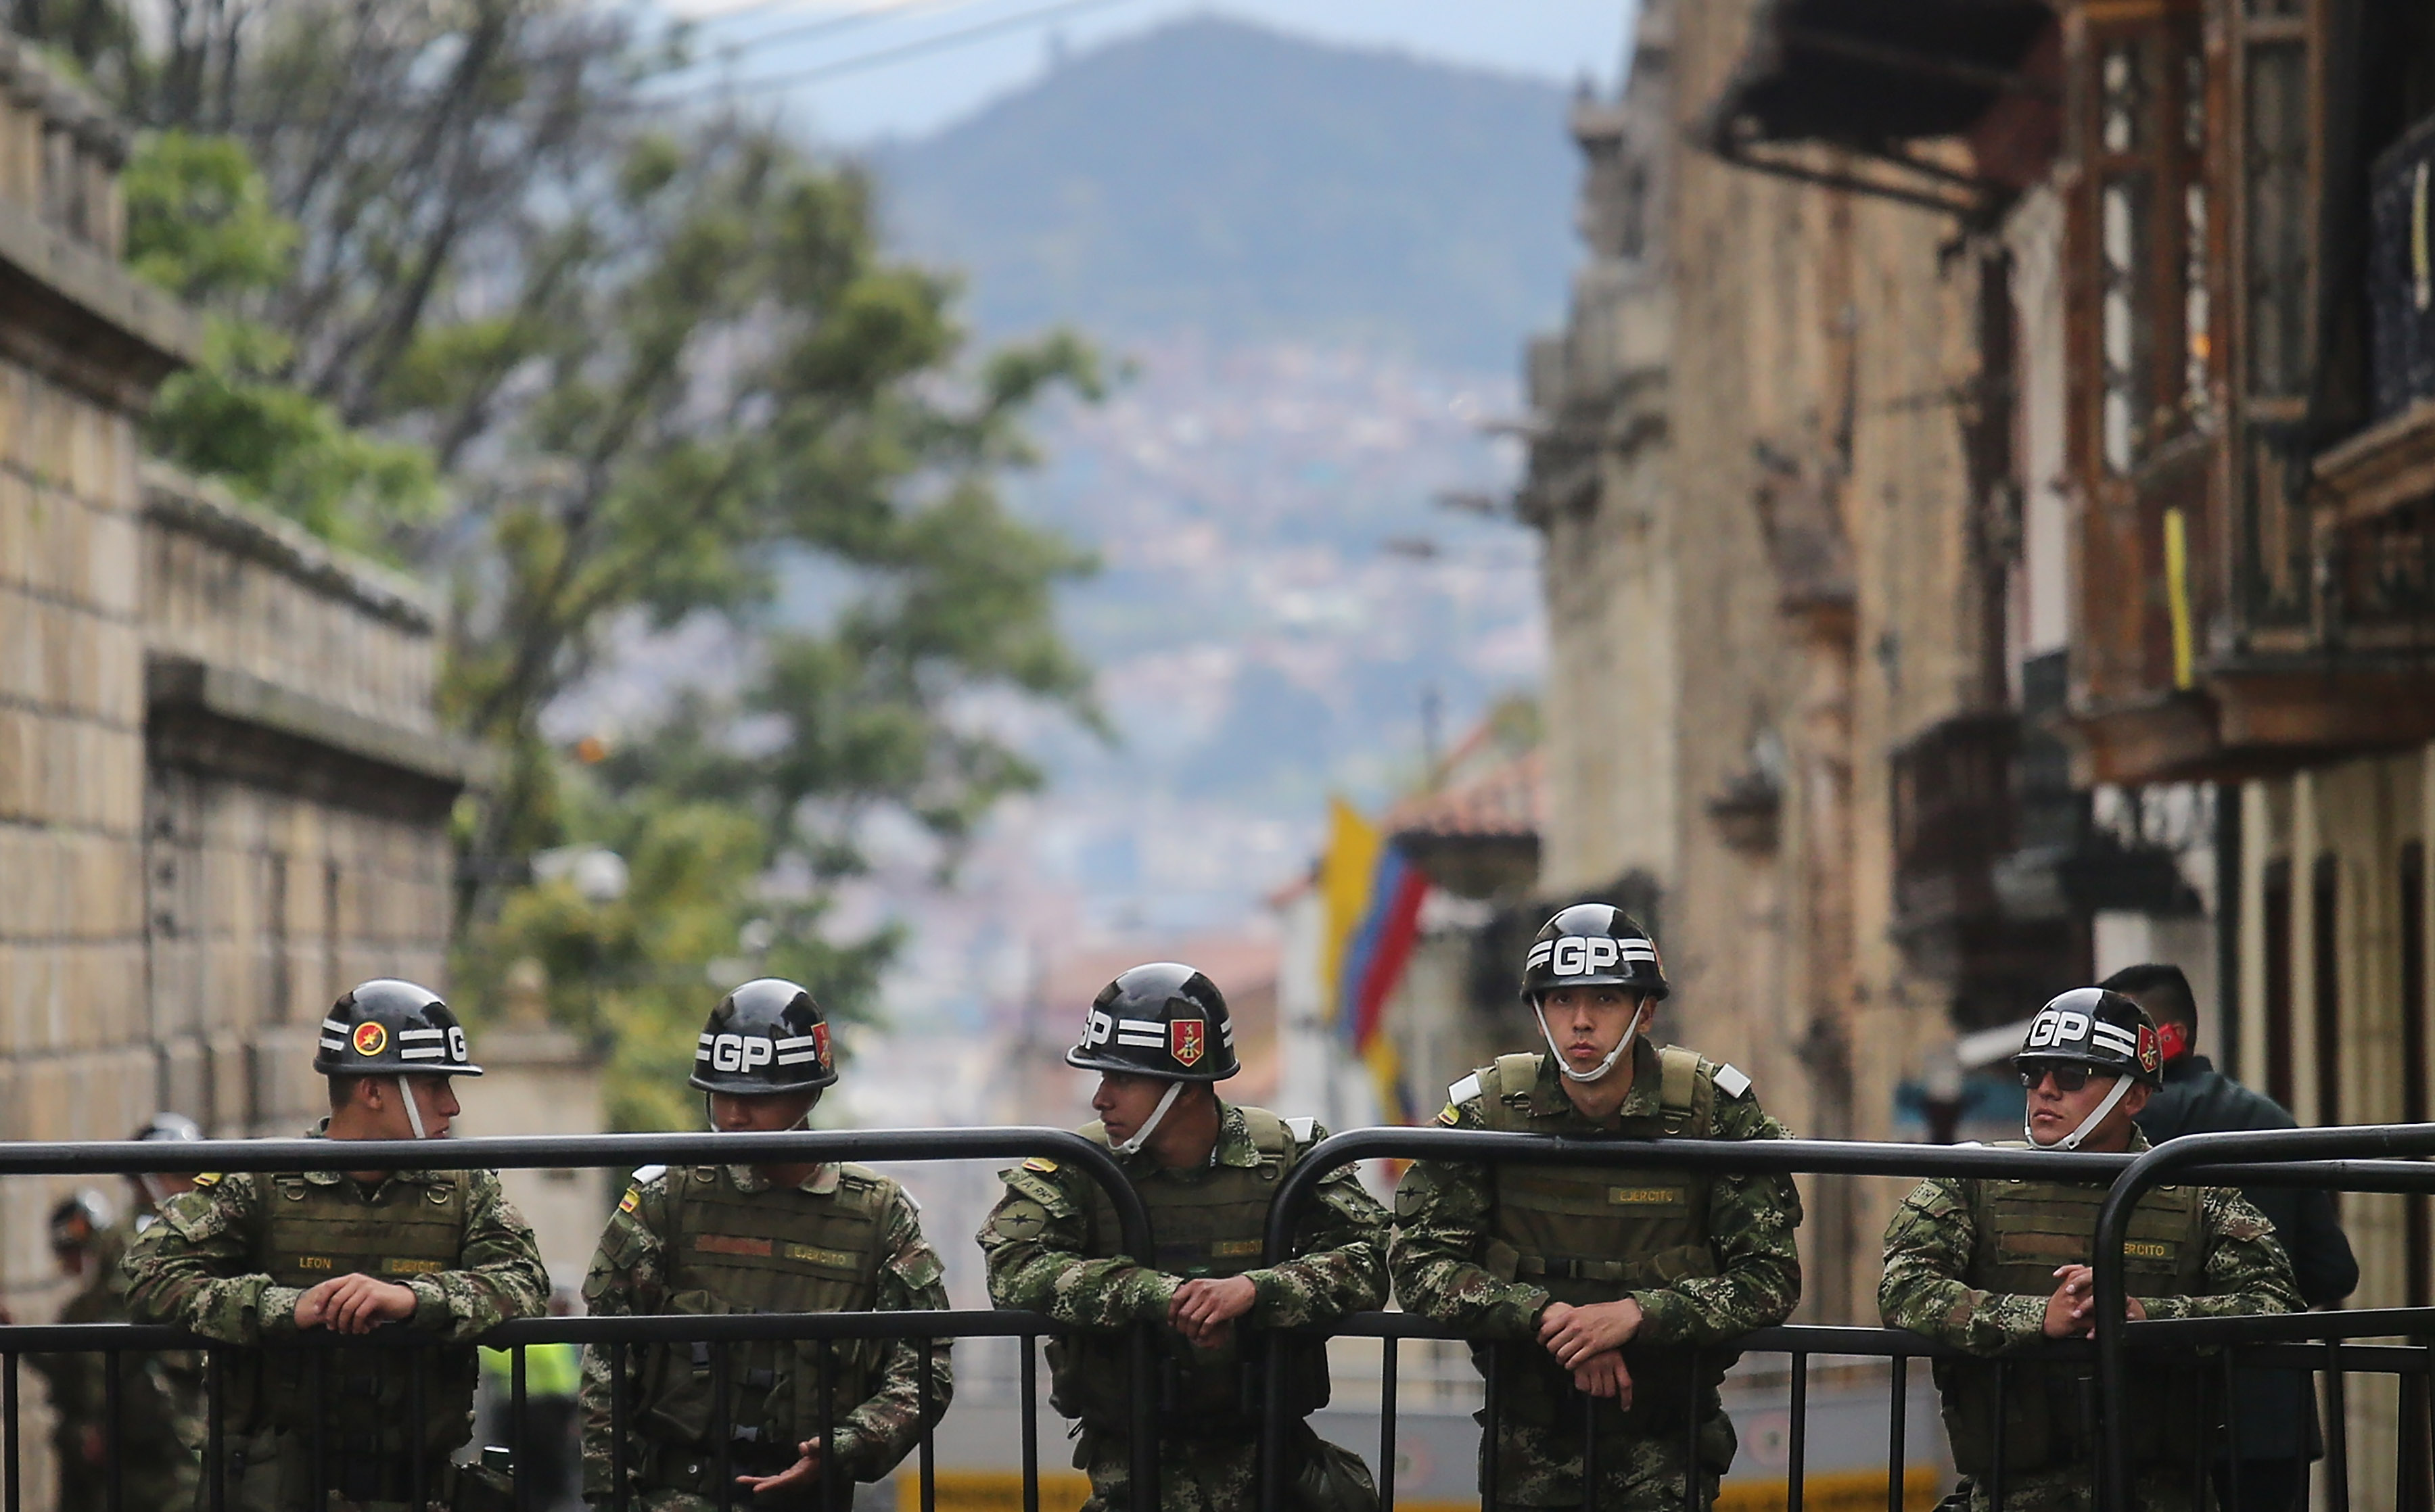 BOGOTA, COLOMBIA - OCTOBER 02: Presidential Gaurd soldiers keep watch during the referendum on a peace accord to end the 52-year-old guerrilla war between the FARC and the state on October 2, 2016 in Bogota, Colombia. The guerrilla war is the longest-running armed conflict in the Americas and has left 220,000 dead. The plan called for a disarmament and re-integration of most of the estimated 7,000 FARC fighters. (Photo by Mario Tama/Getty Images)